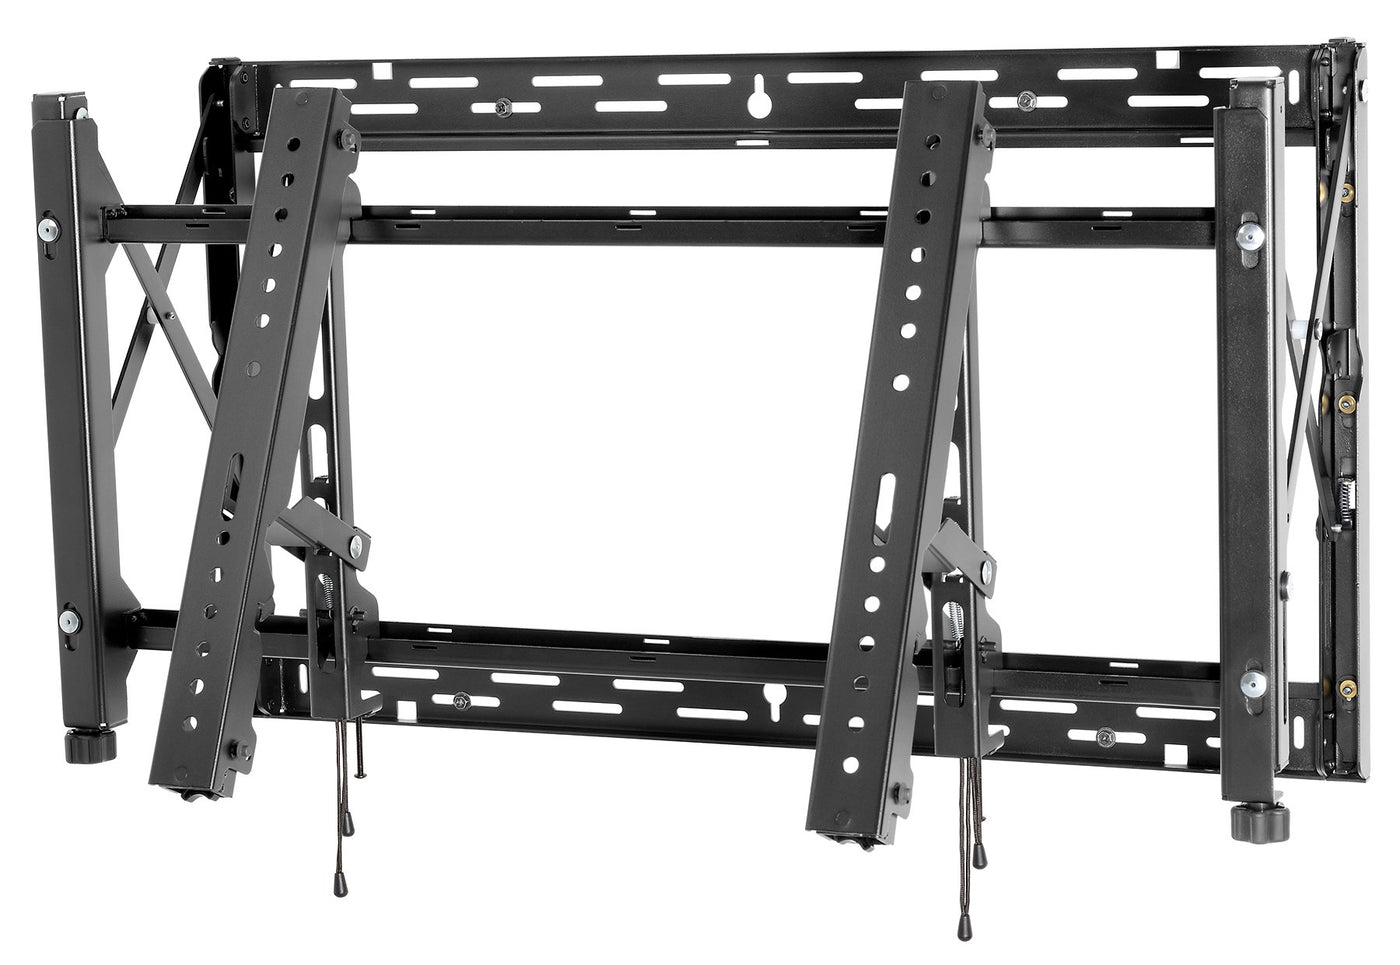 Peerless DS-VW765-LAND SmartMount Video Wall Mount Landscape For Displays up to 125lb